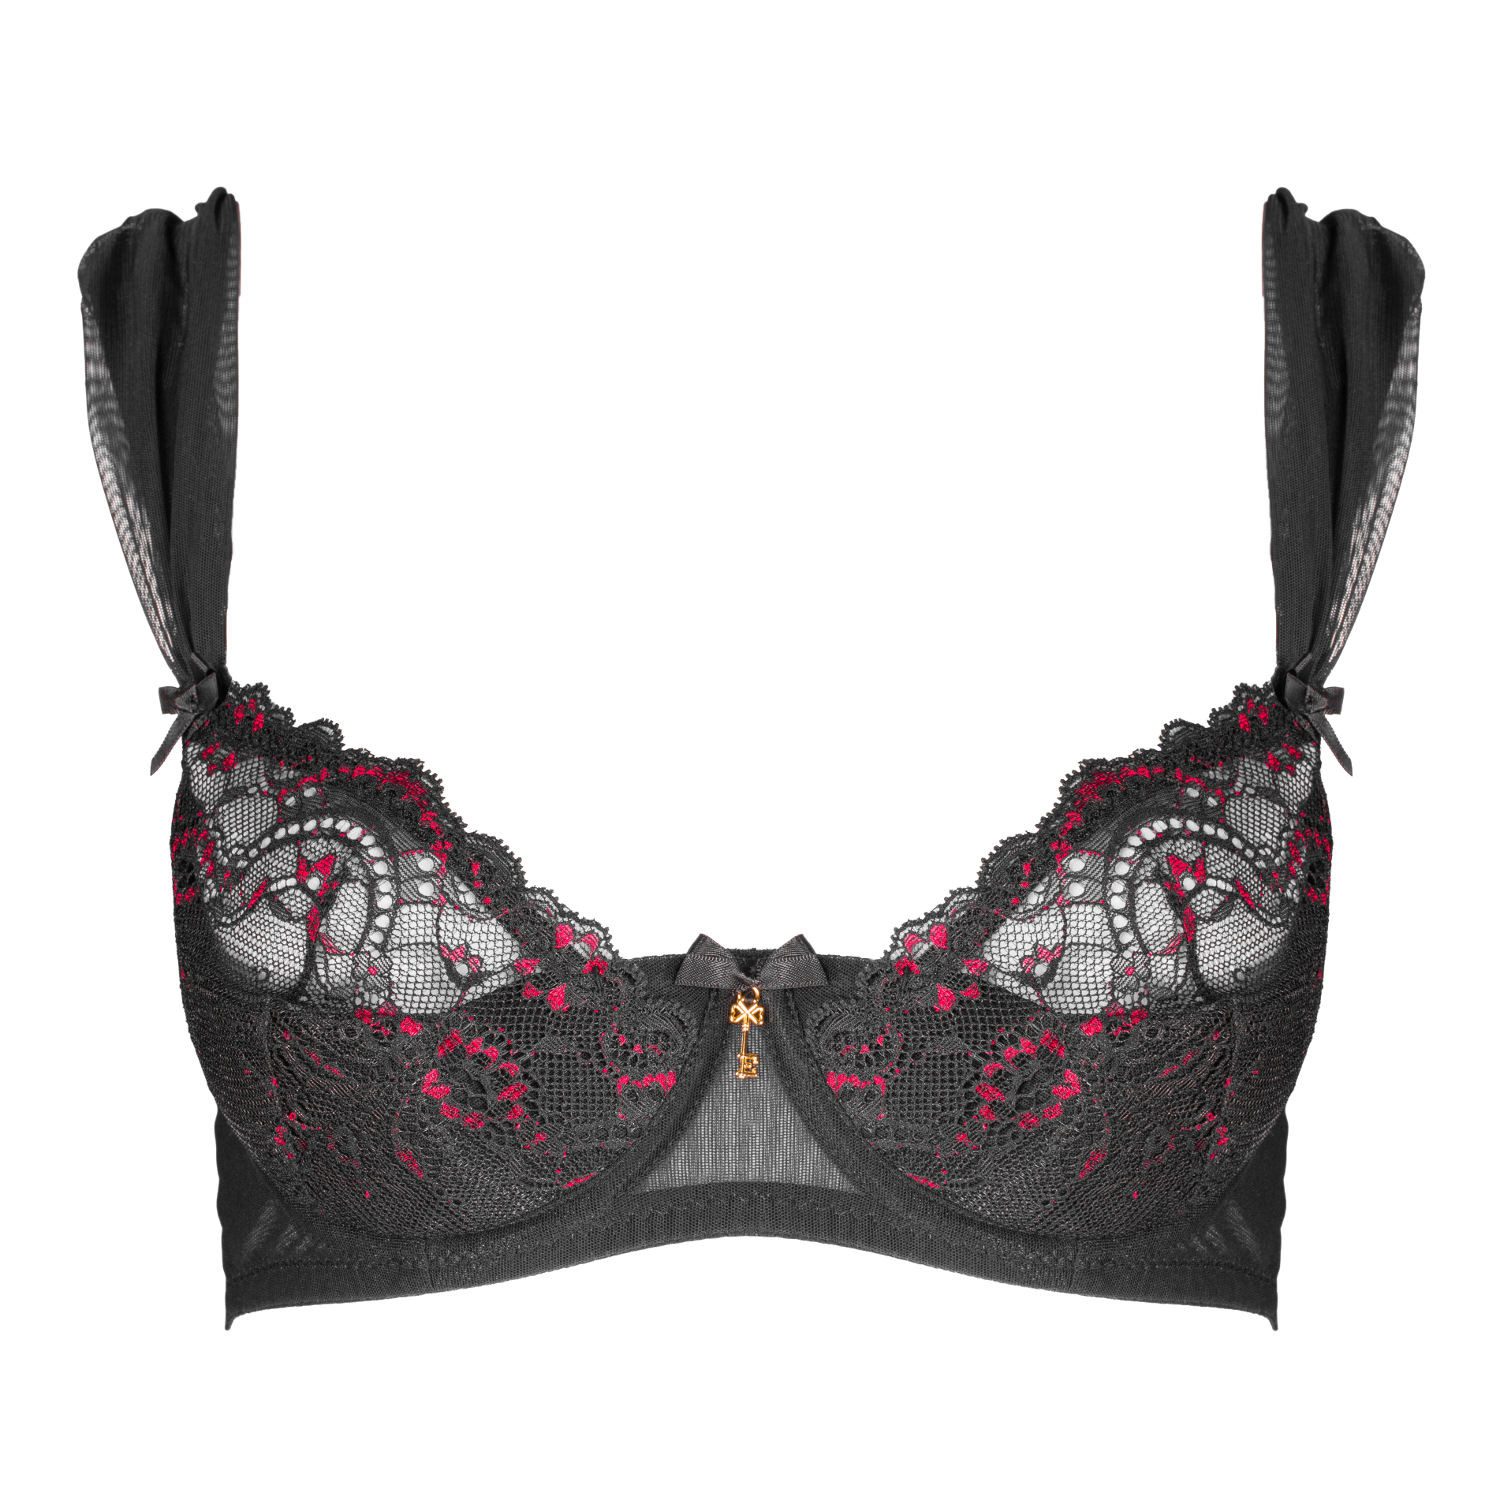 Luxurious bra by Escora with wonderful lace highlights